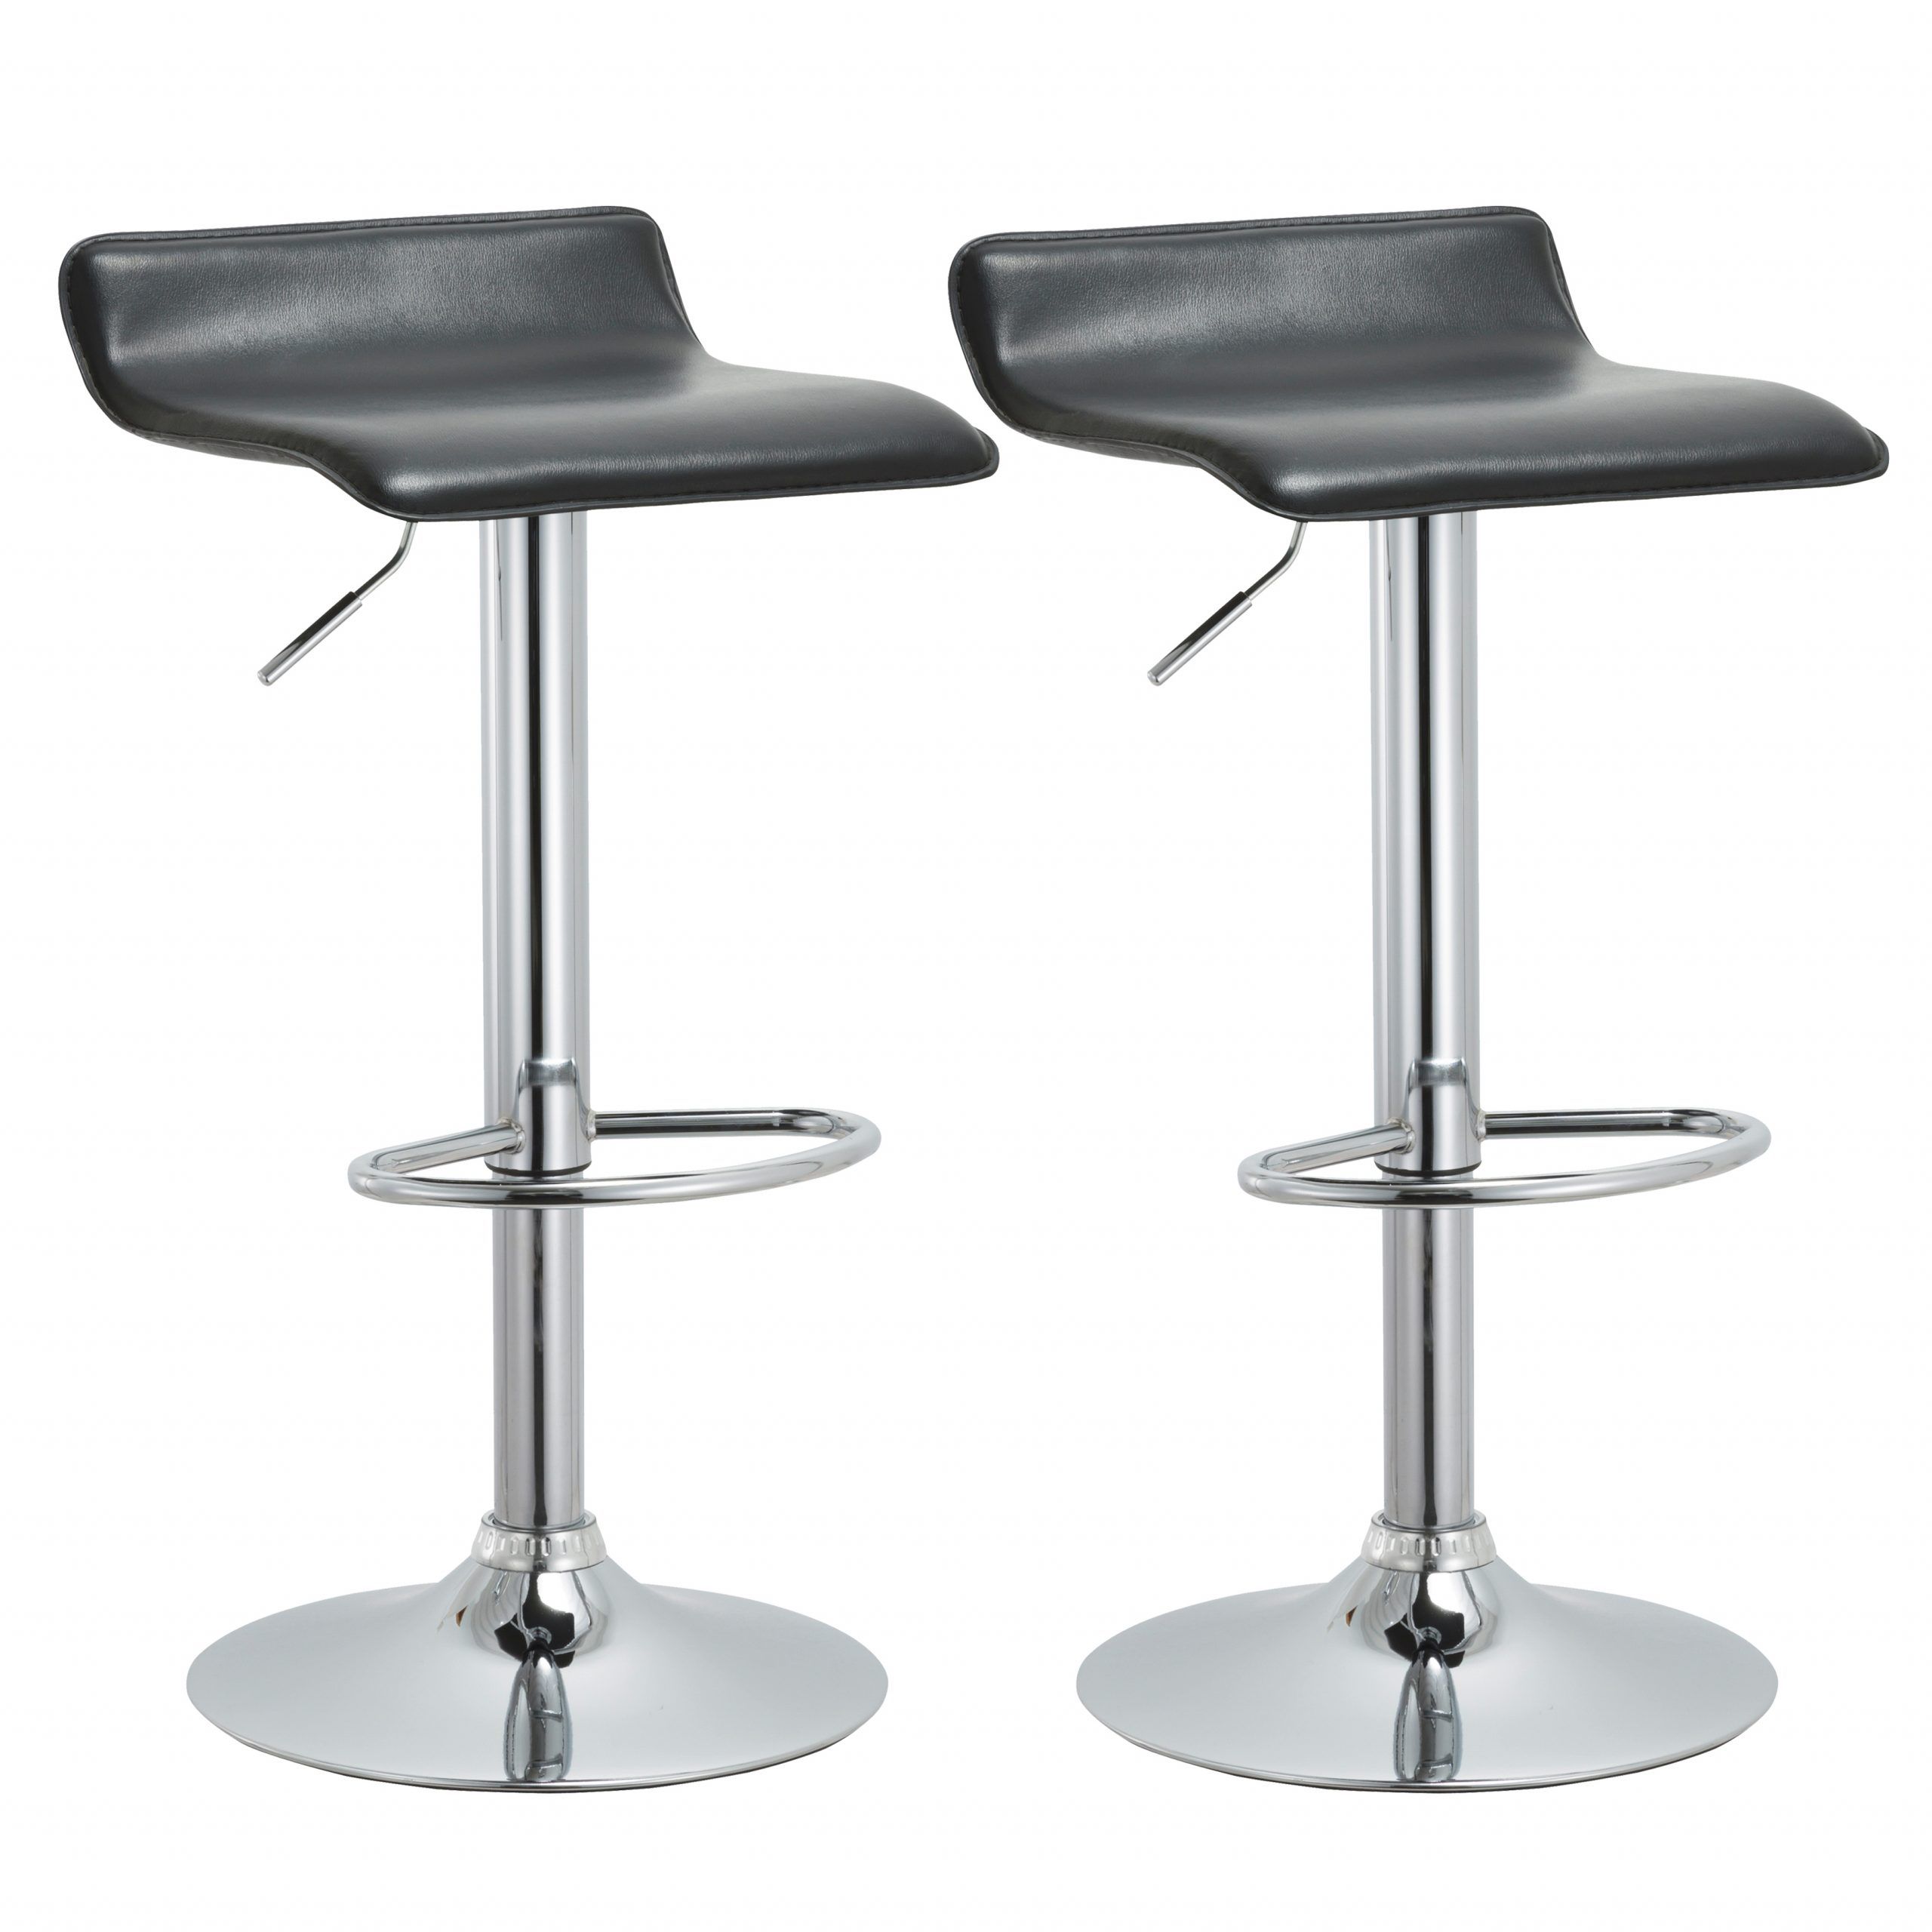 Adjustable Swivel Chrome Bar Stool With Footrest (set Of 2) – Christies Inside Chrome Swivel Ottomans (View 14 of 20)